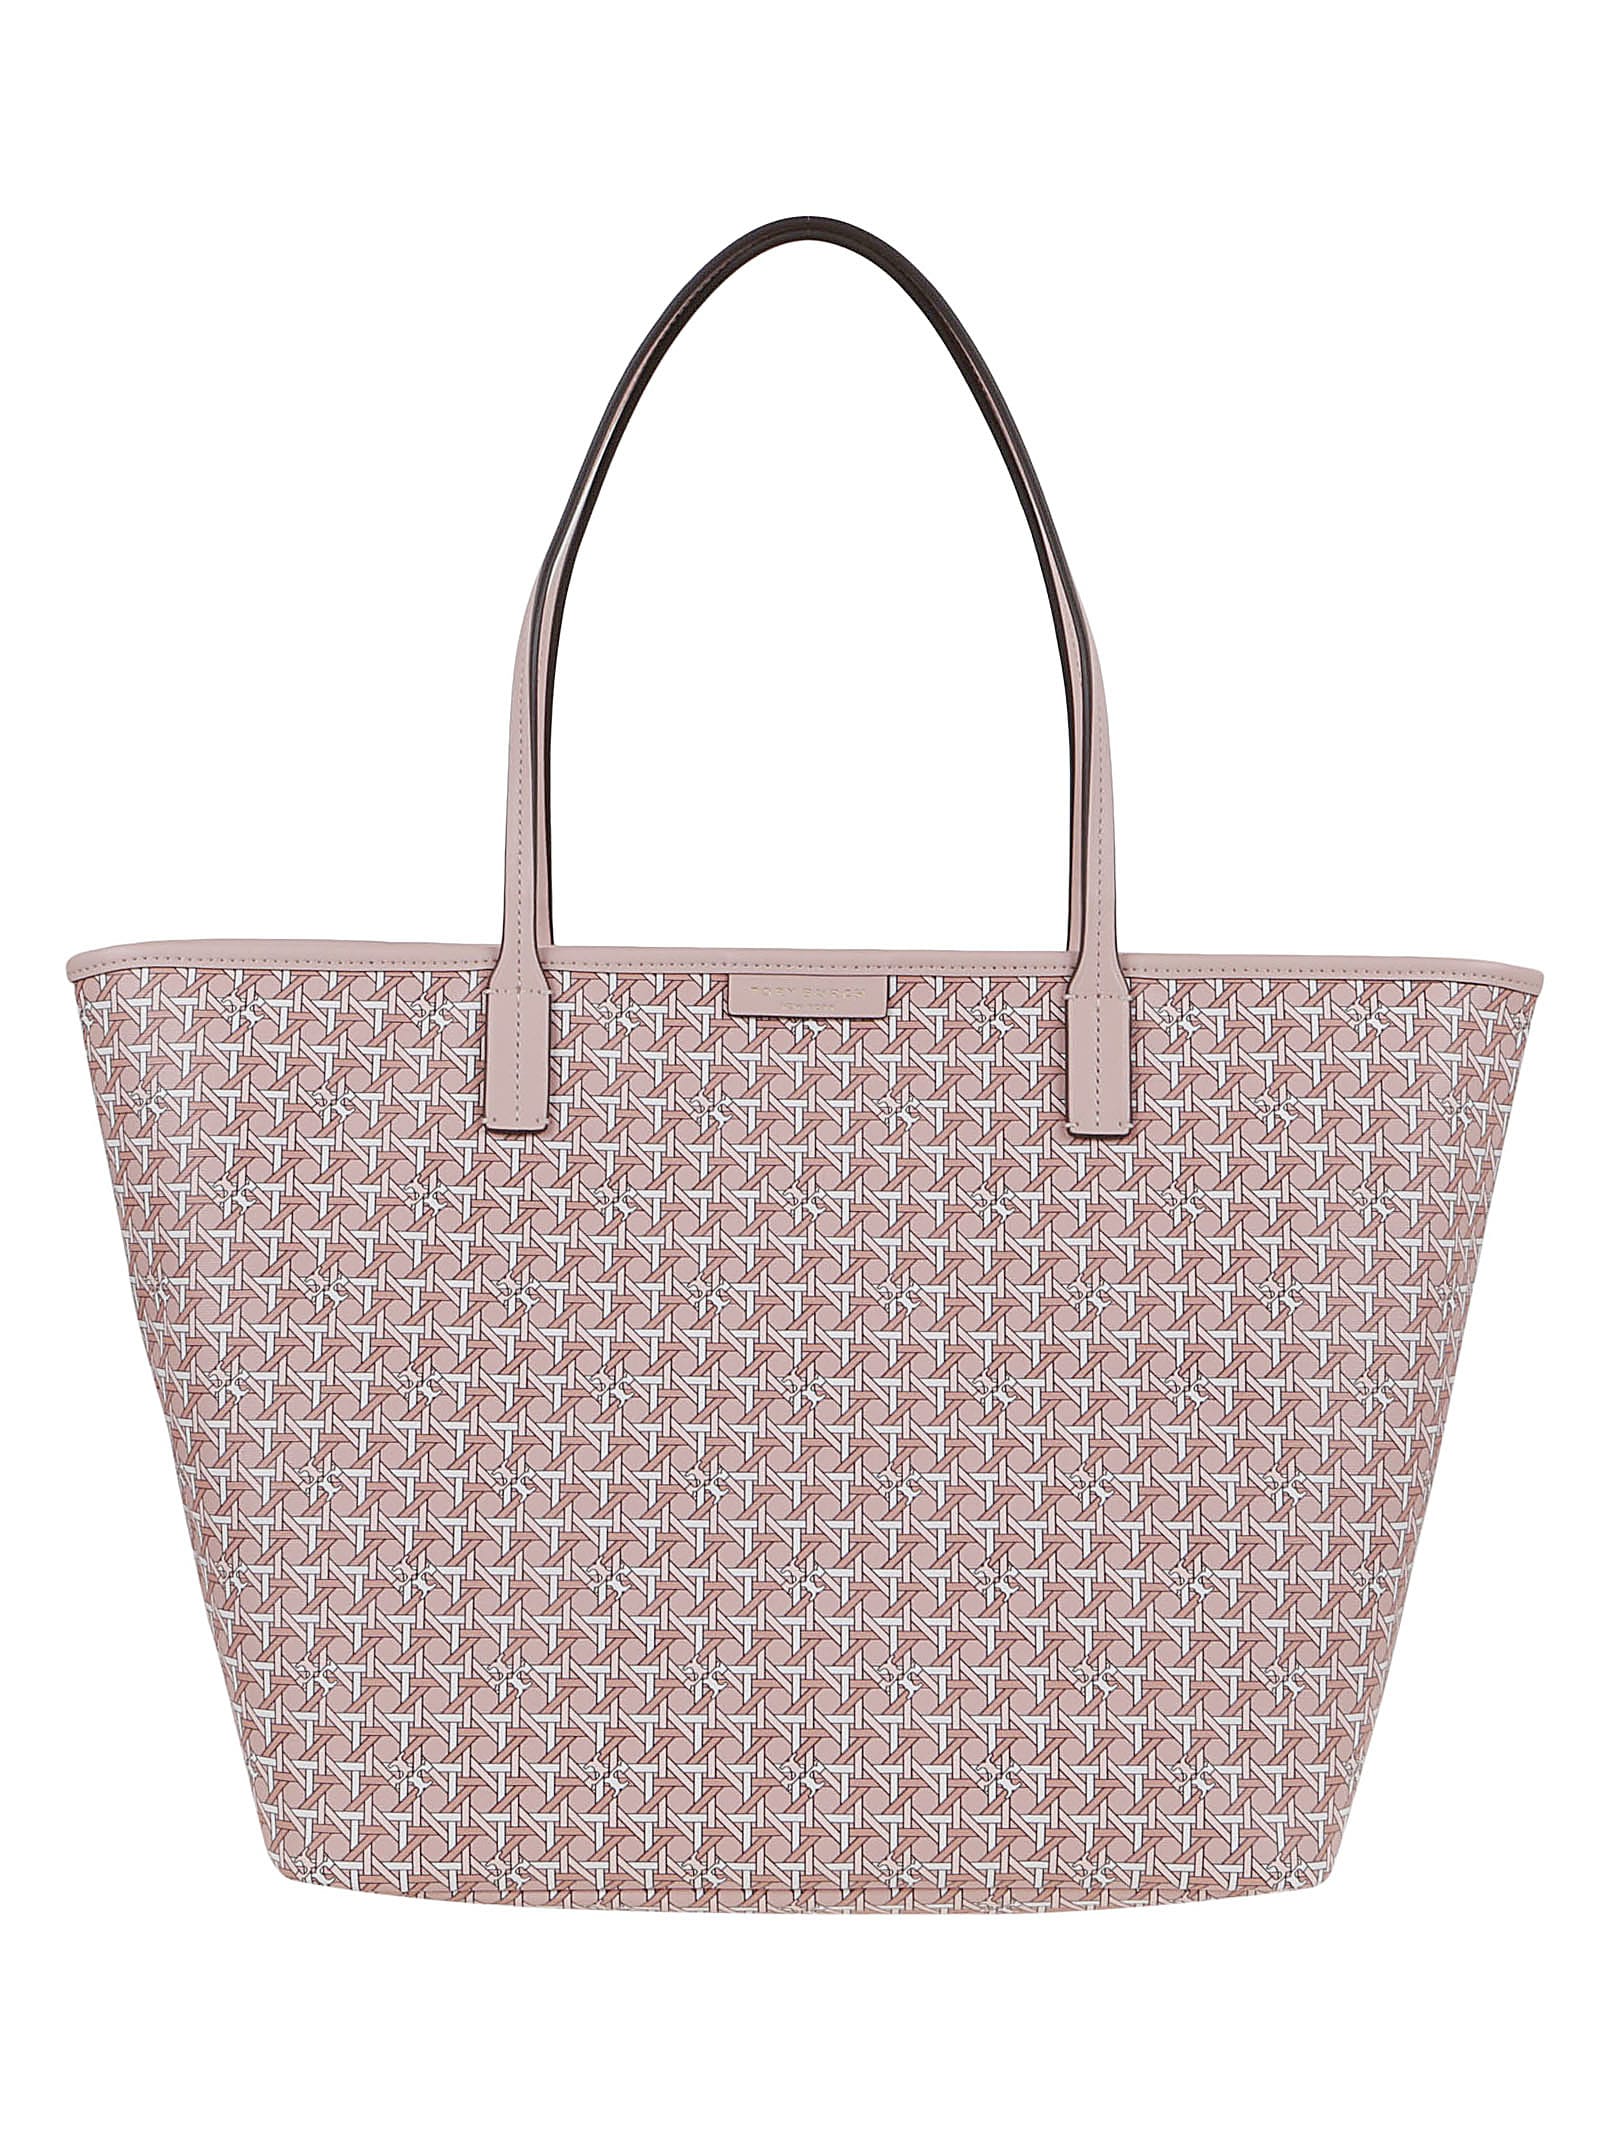 Tory Burch Coated Canvas Zip Tote - Winter Peach - Monkee's of the Pines